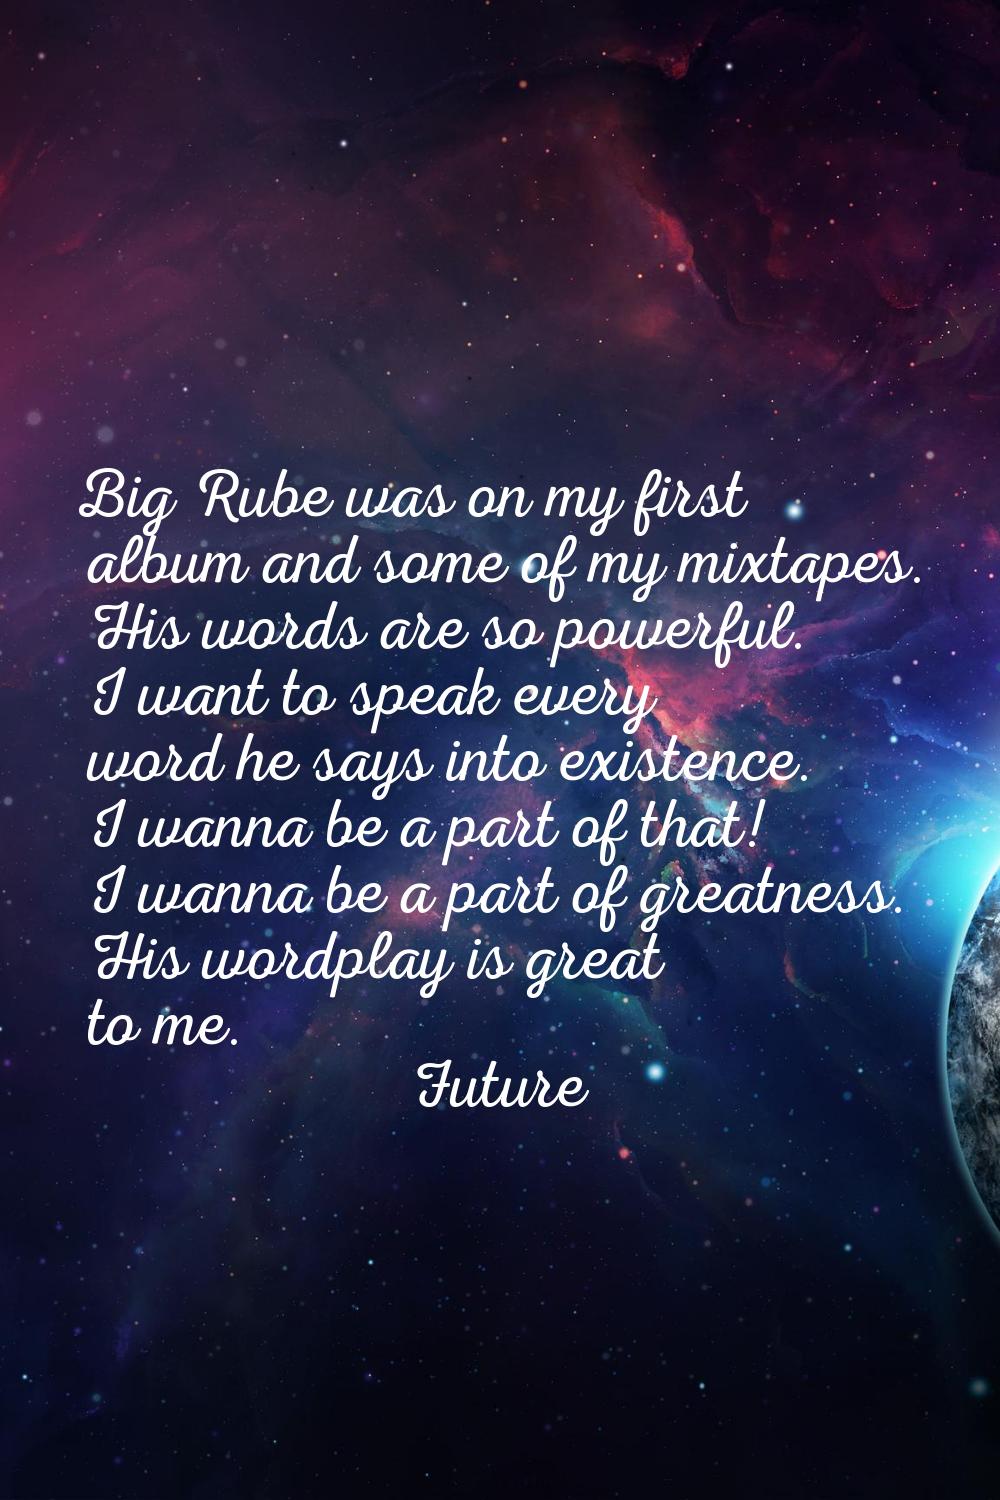 Big Rube was on my first album and some of my mixtapes. His words are so powerful. I want to speak 